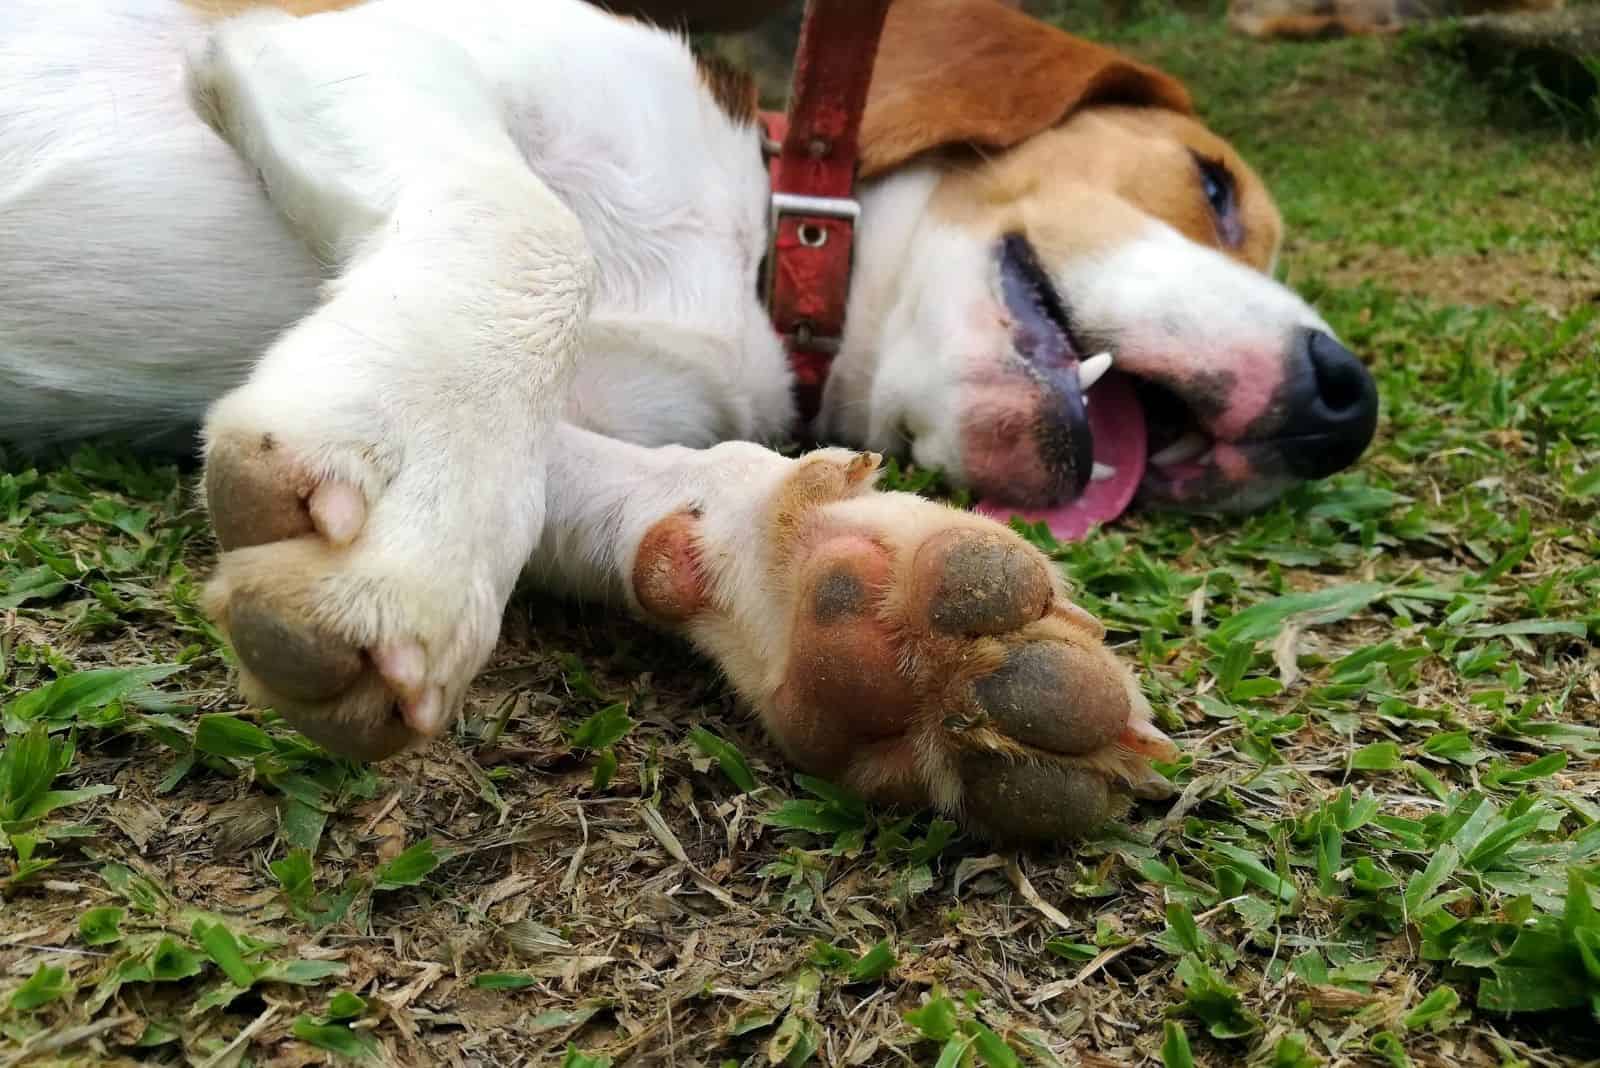 selected focus puppy playing dead with tongue out in the grass